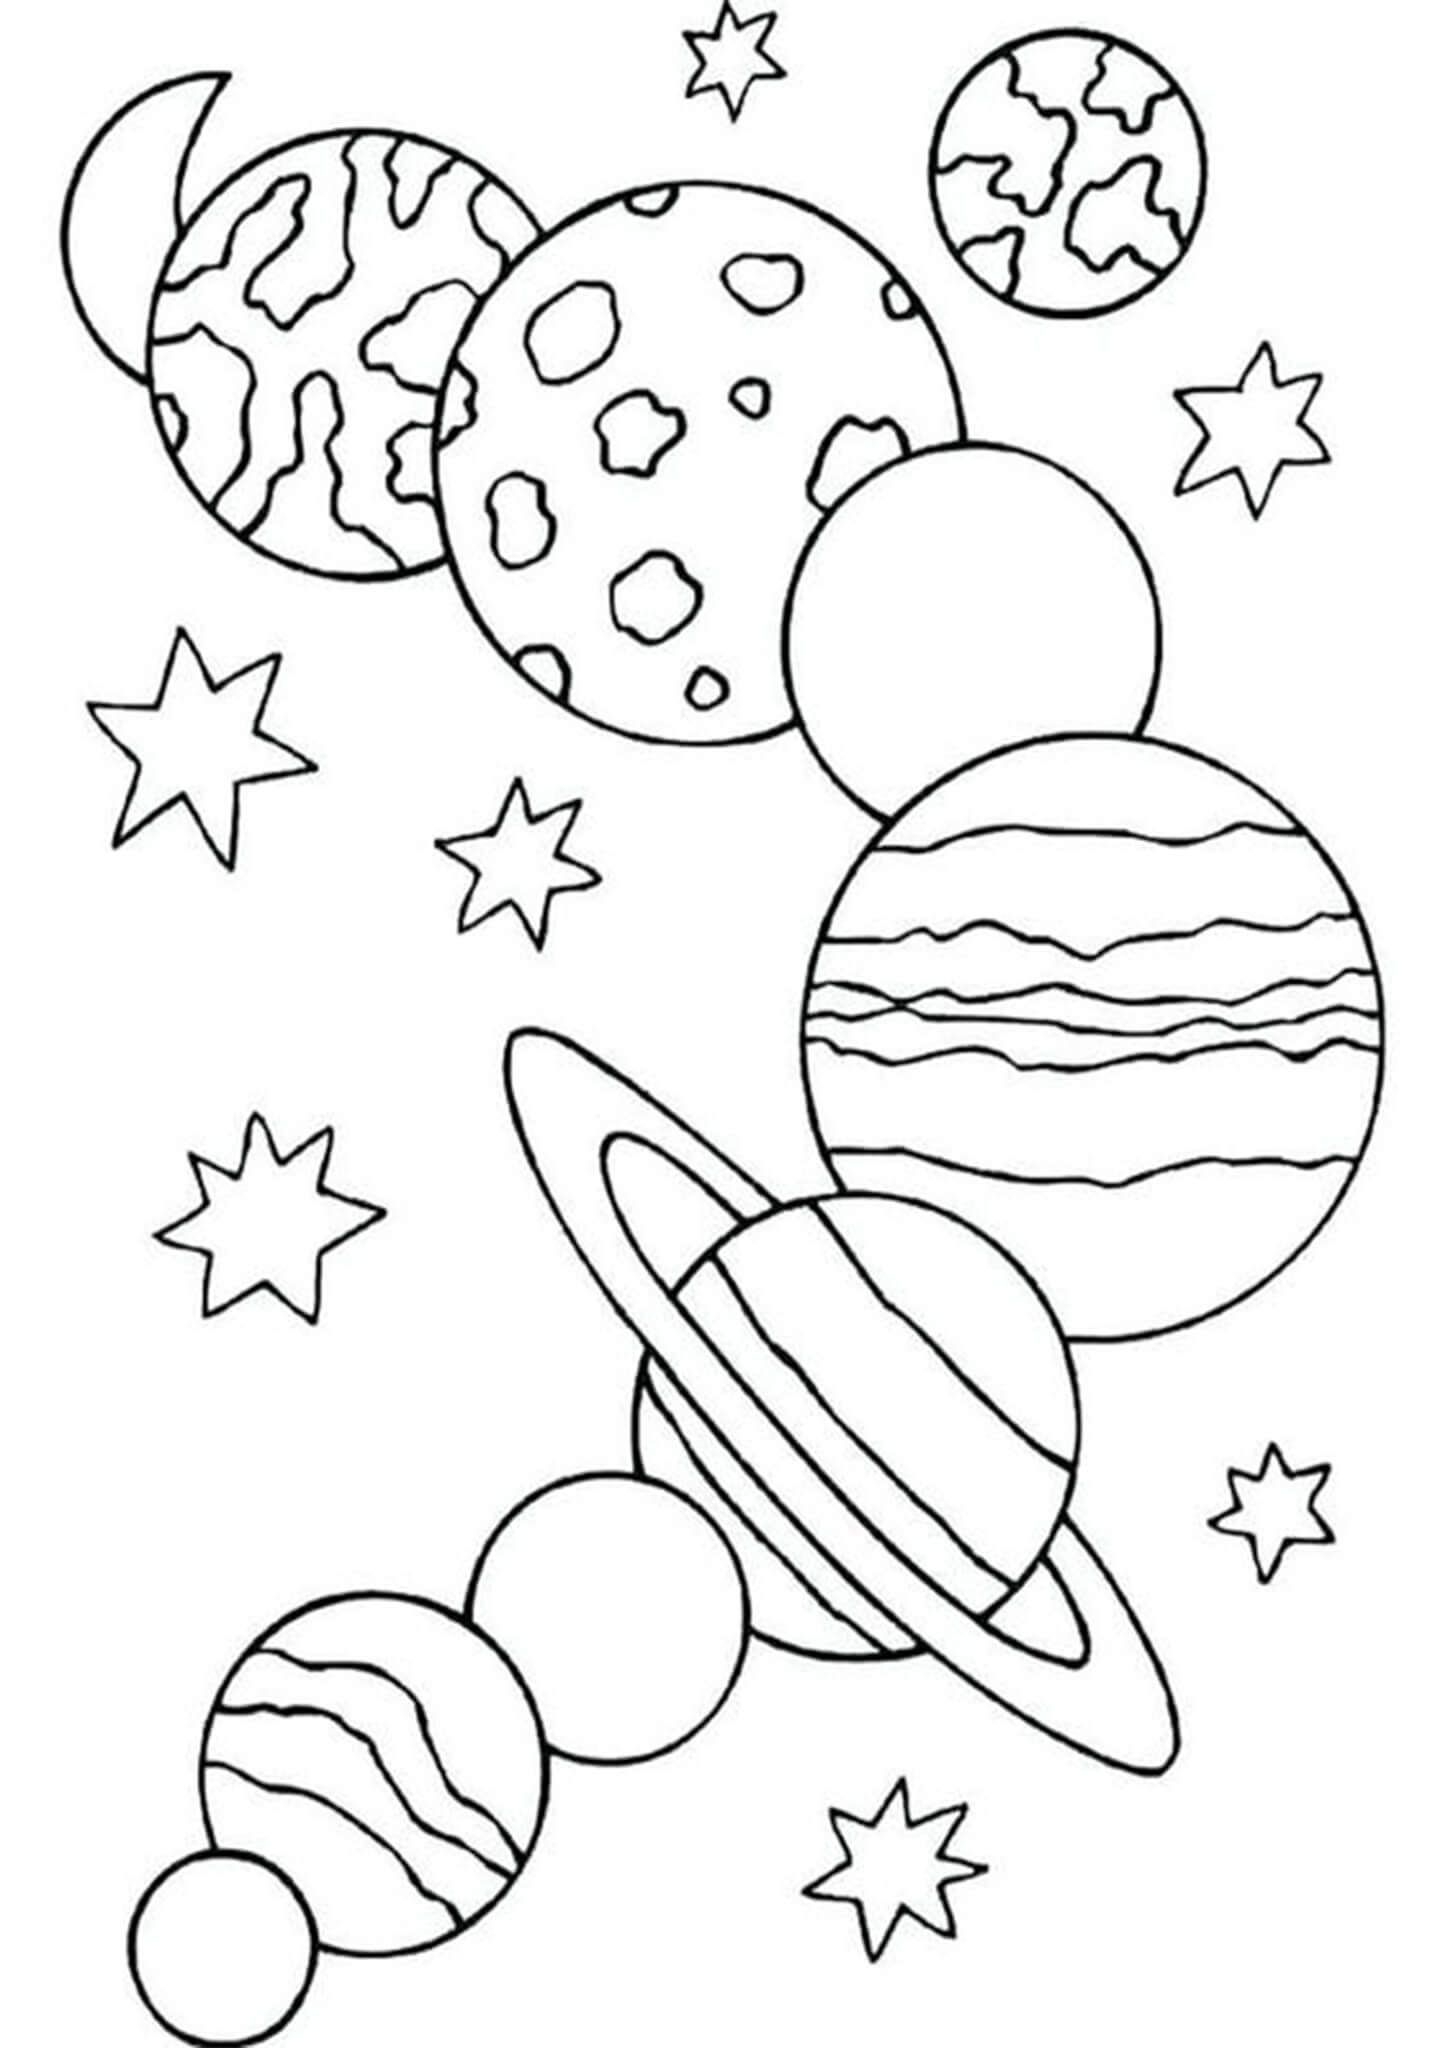 Great coloring planet space